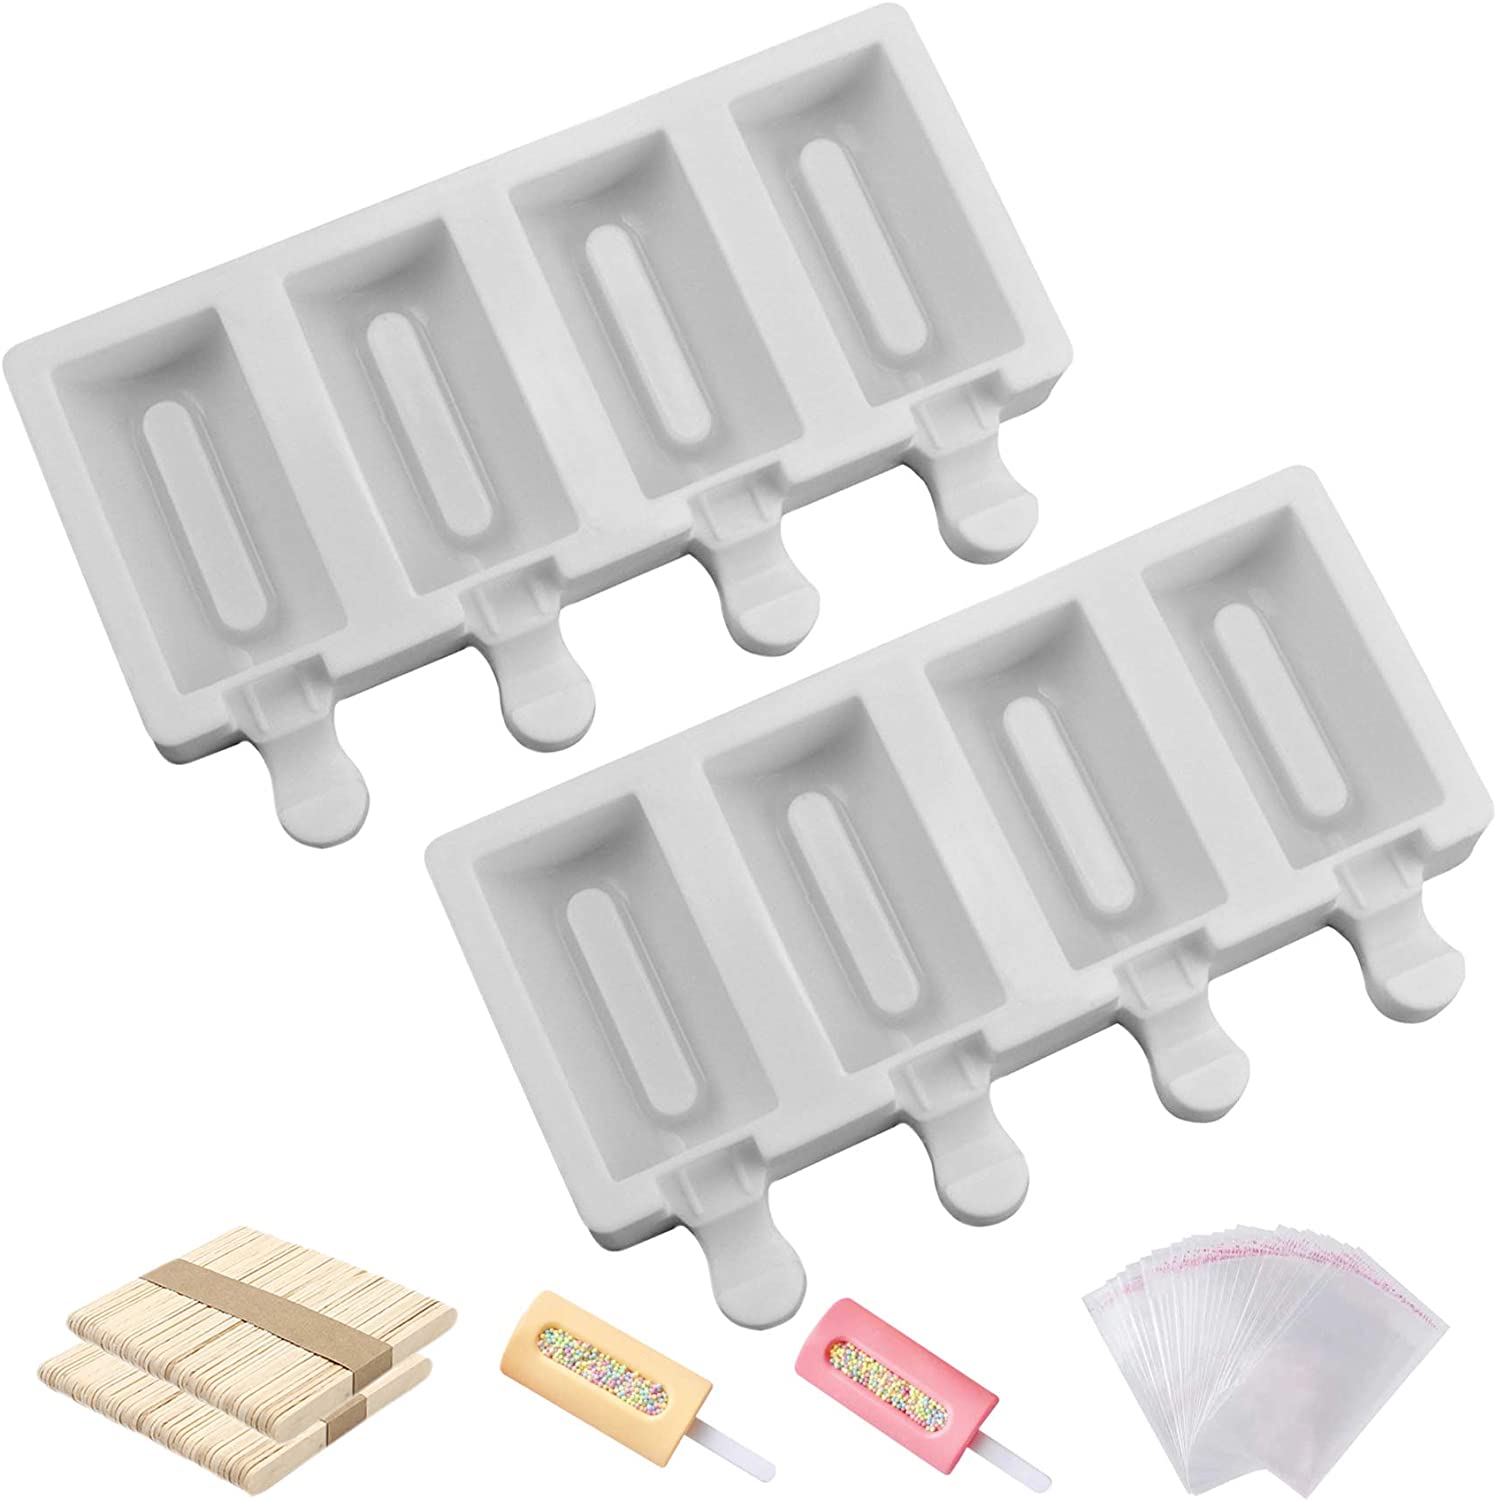 Joho Baking Popsicle Molds Ice Pop Molds -  - Silicone Cakesicle Mold for homemade popsicles